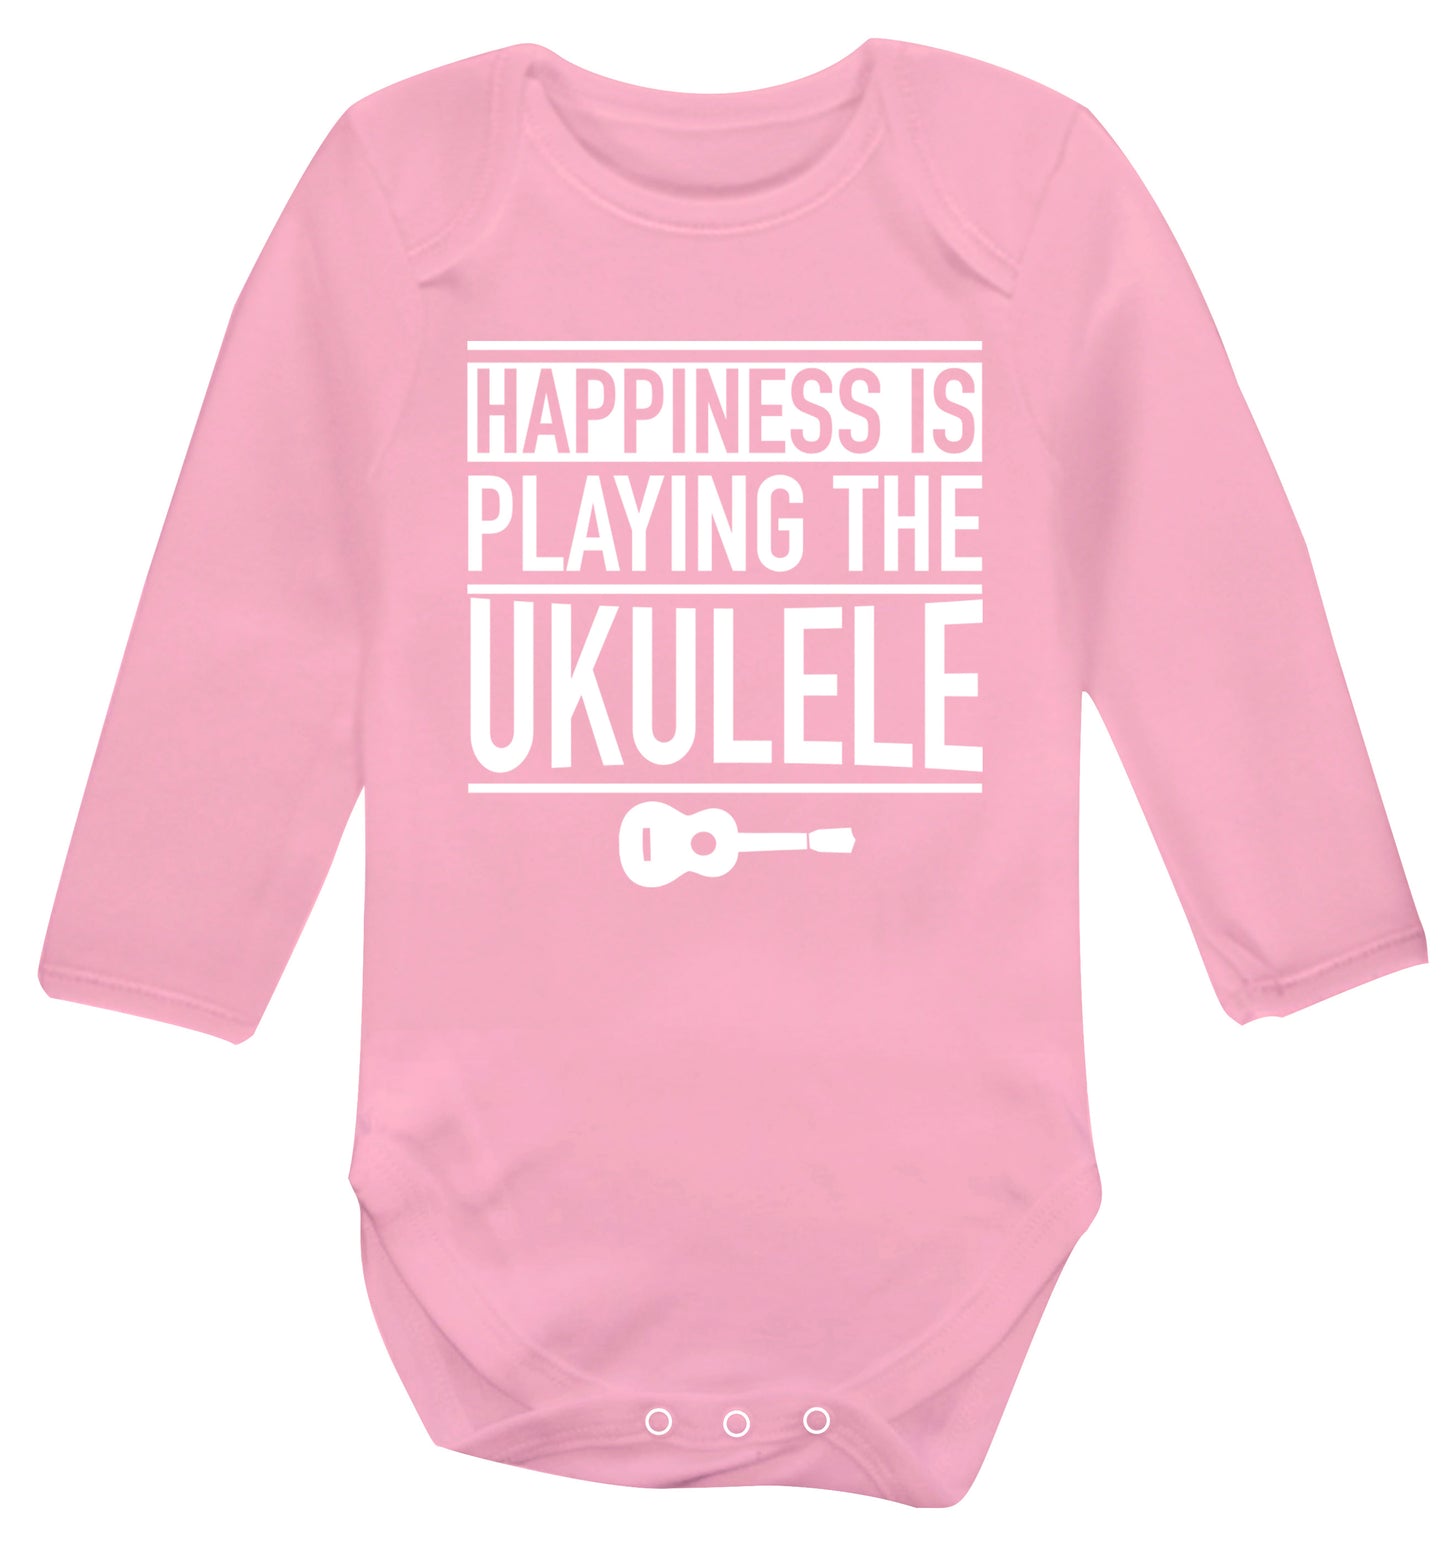 Happines is playing the ukulele Baby Vest long sleeved pale pink 6-12 months